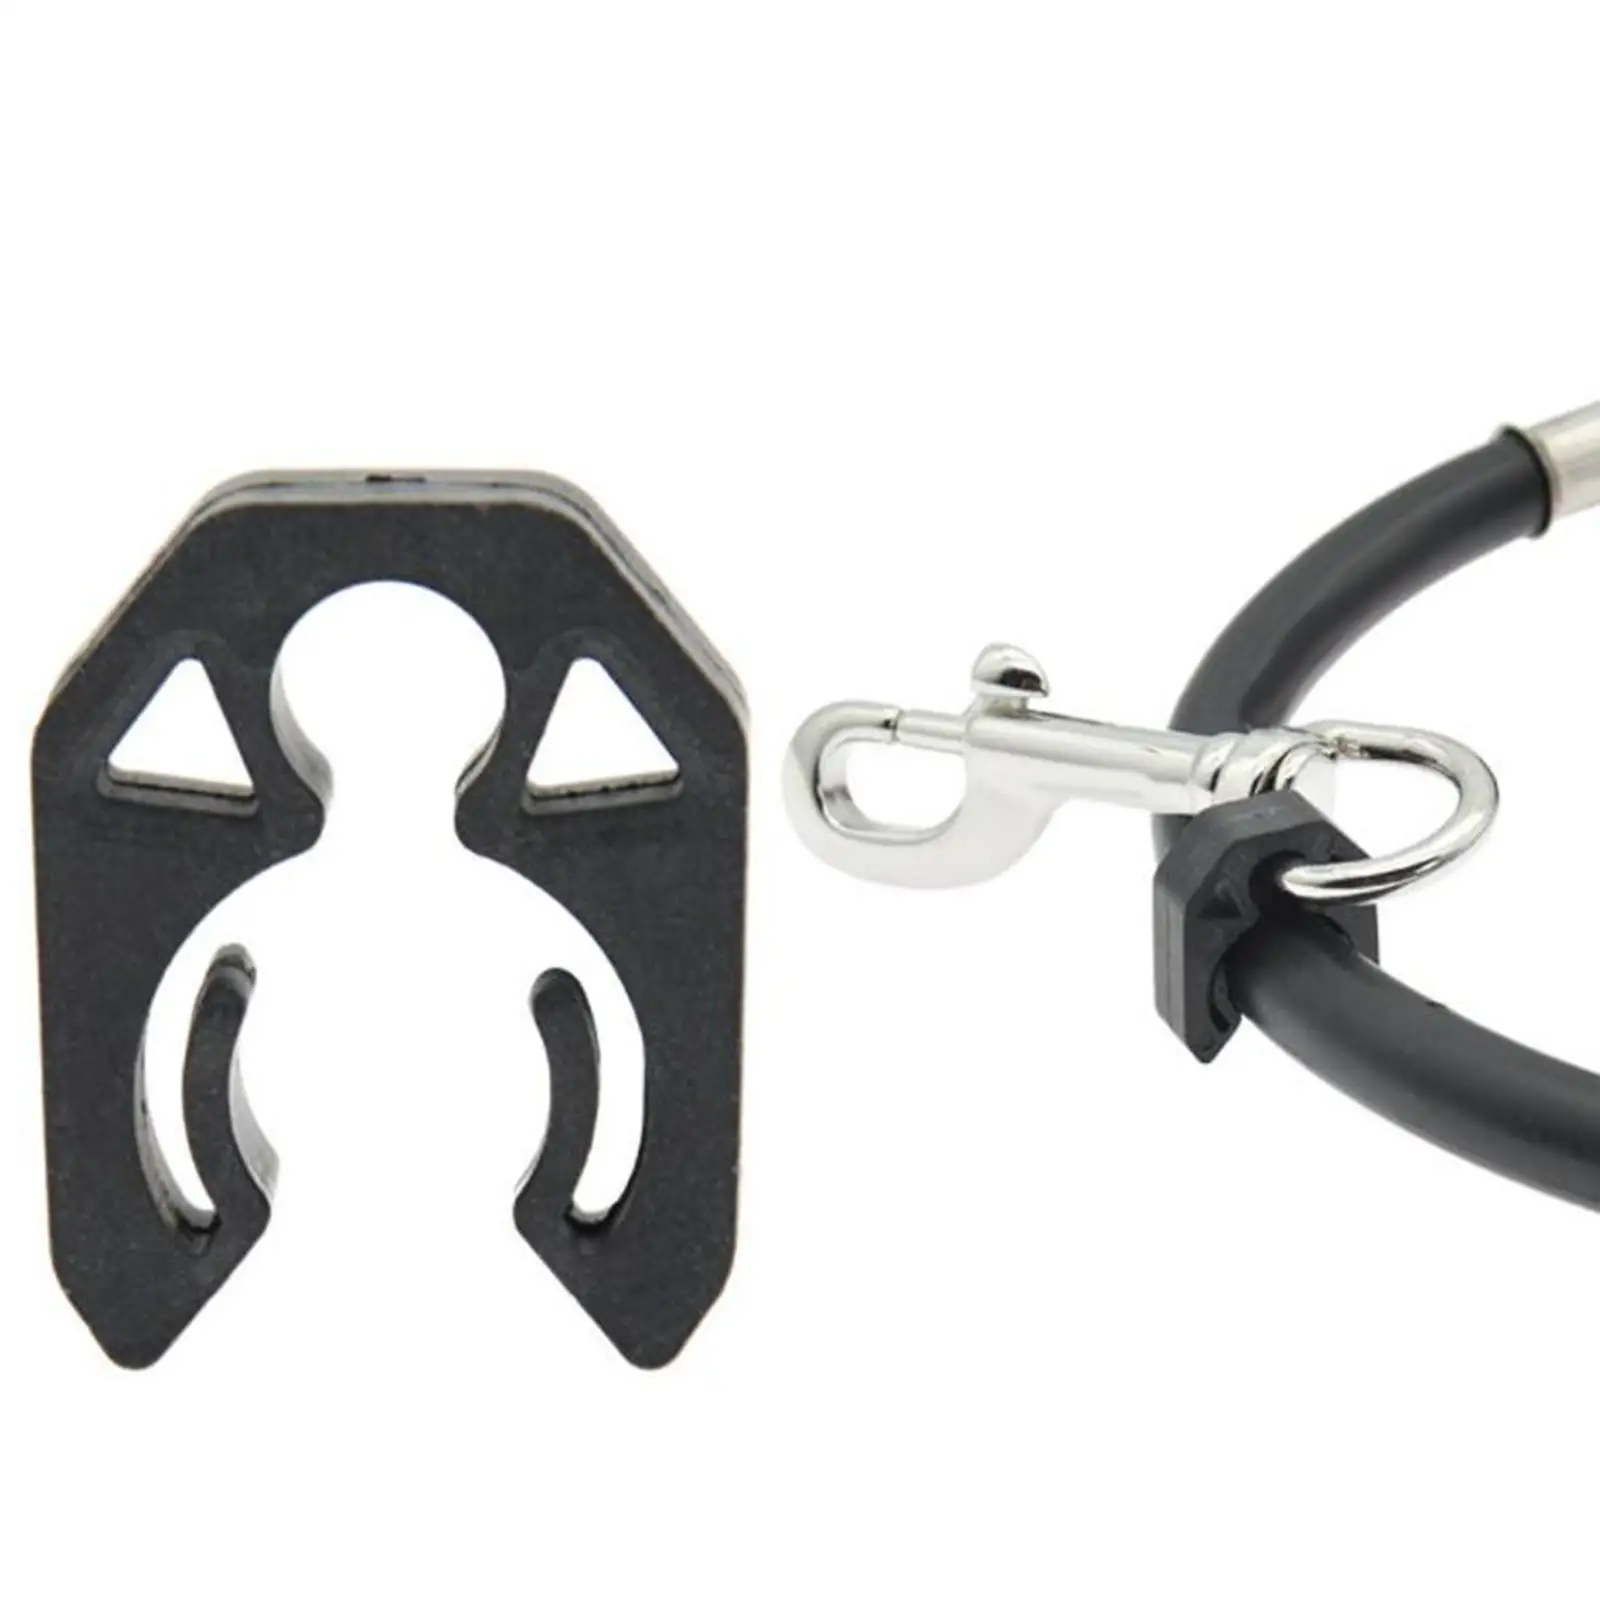 Scuba Diving Fixed Hook with Snap Hook Buckle Double BCD Hose Holder Plastic